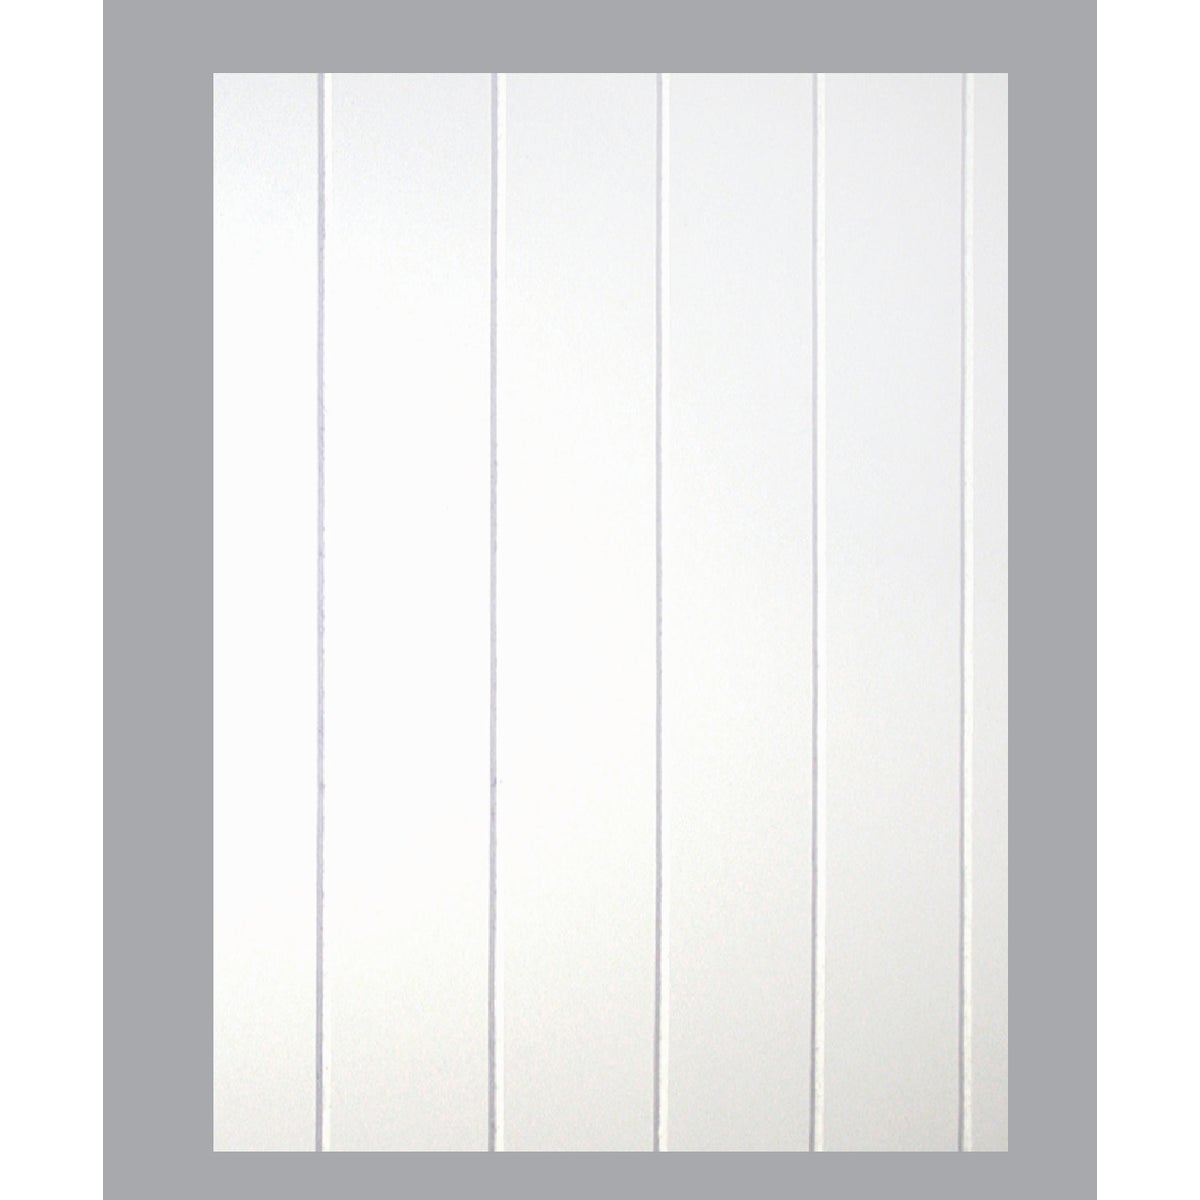 Item 109206, Wall paneling featuring the classic look of Dover V-groove planking.